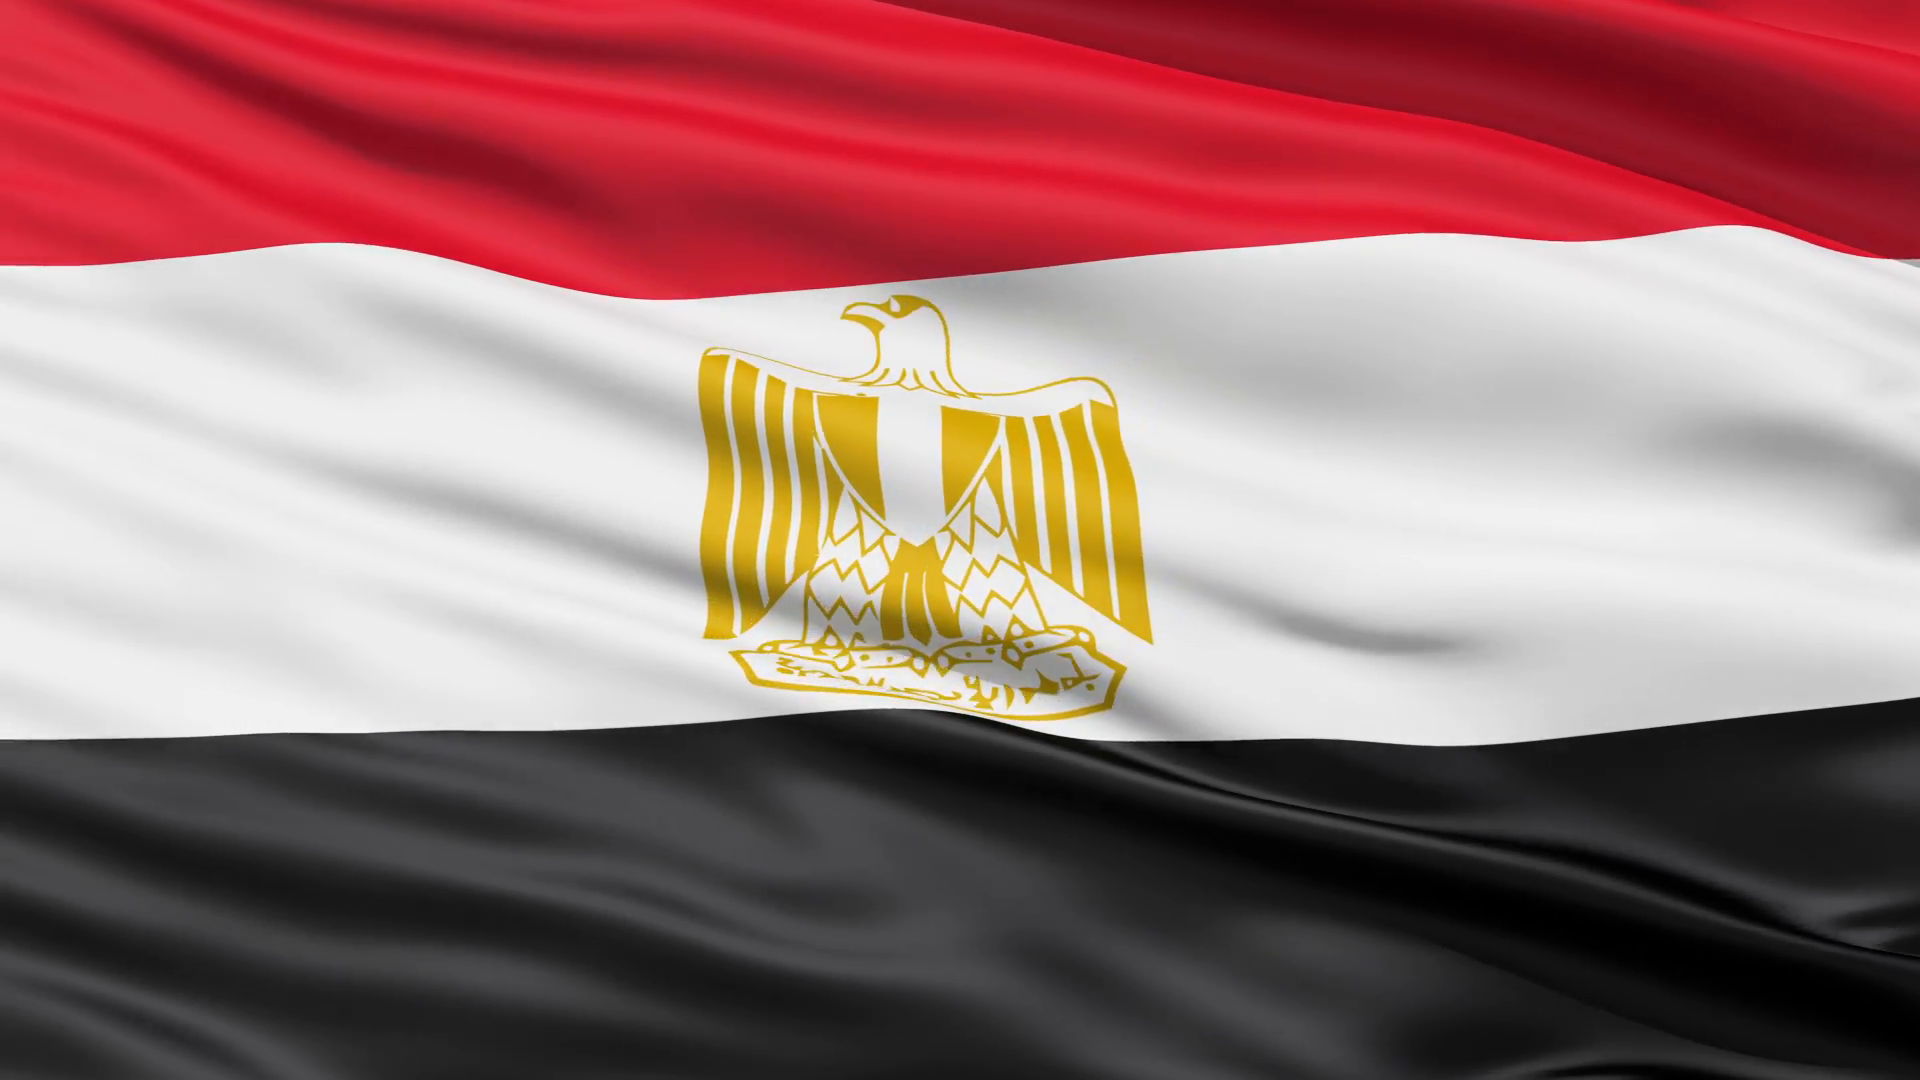 Tricolor Waving Flag Of Egypt With The National Emblem - Egypt Flag Waving , HD Wallpaper & Backgrounds